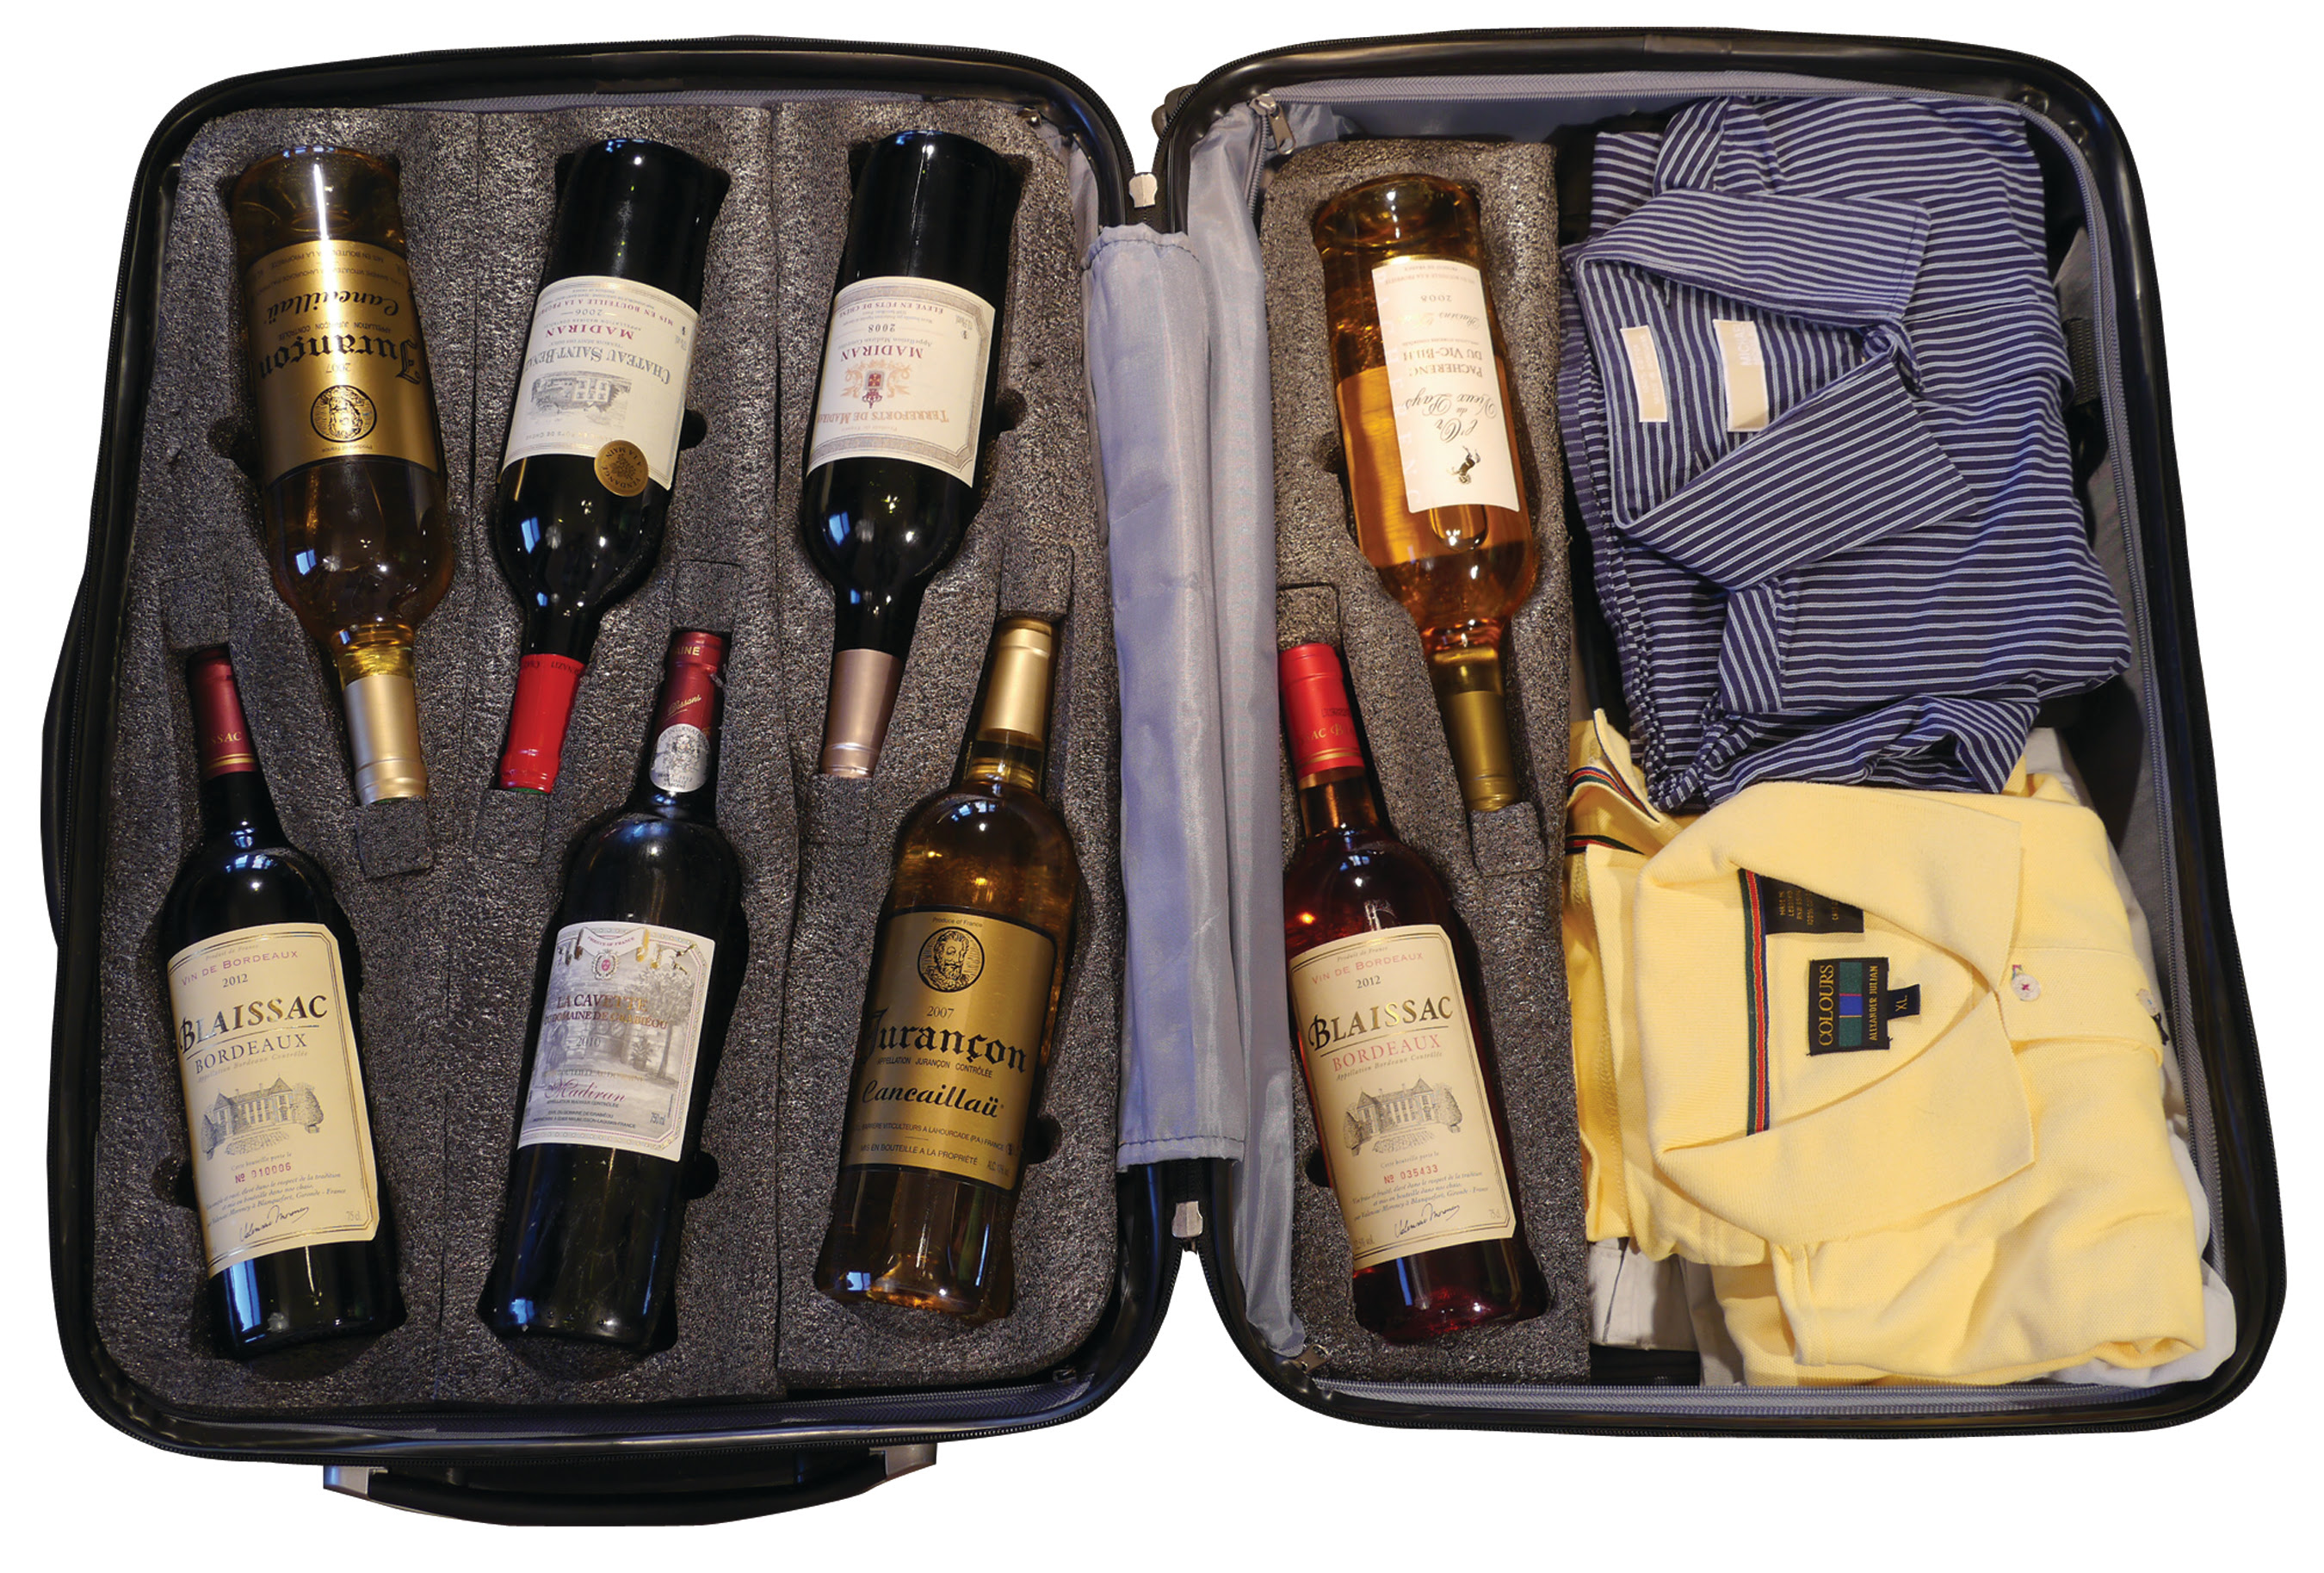 VinGarde Valise Wine Suitcase Gets Bottles There Intact